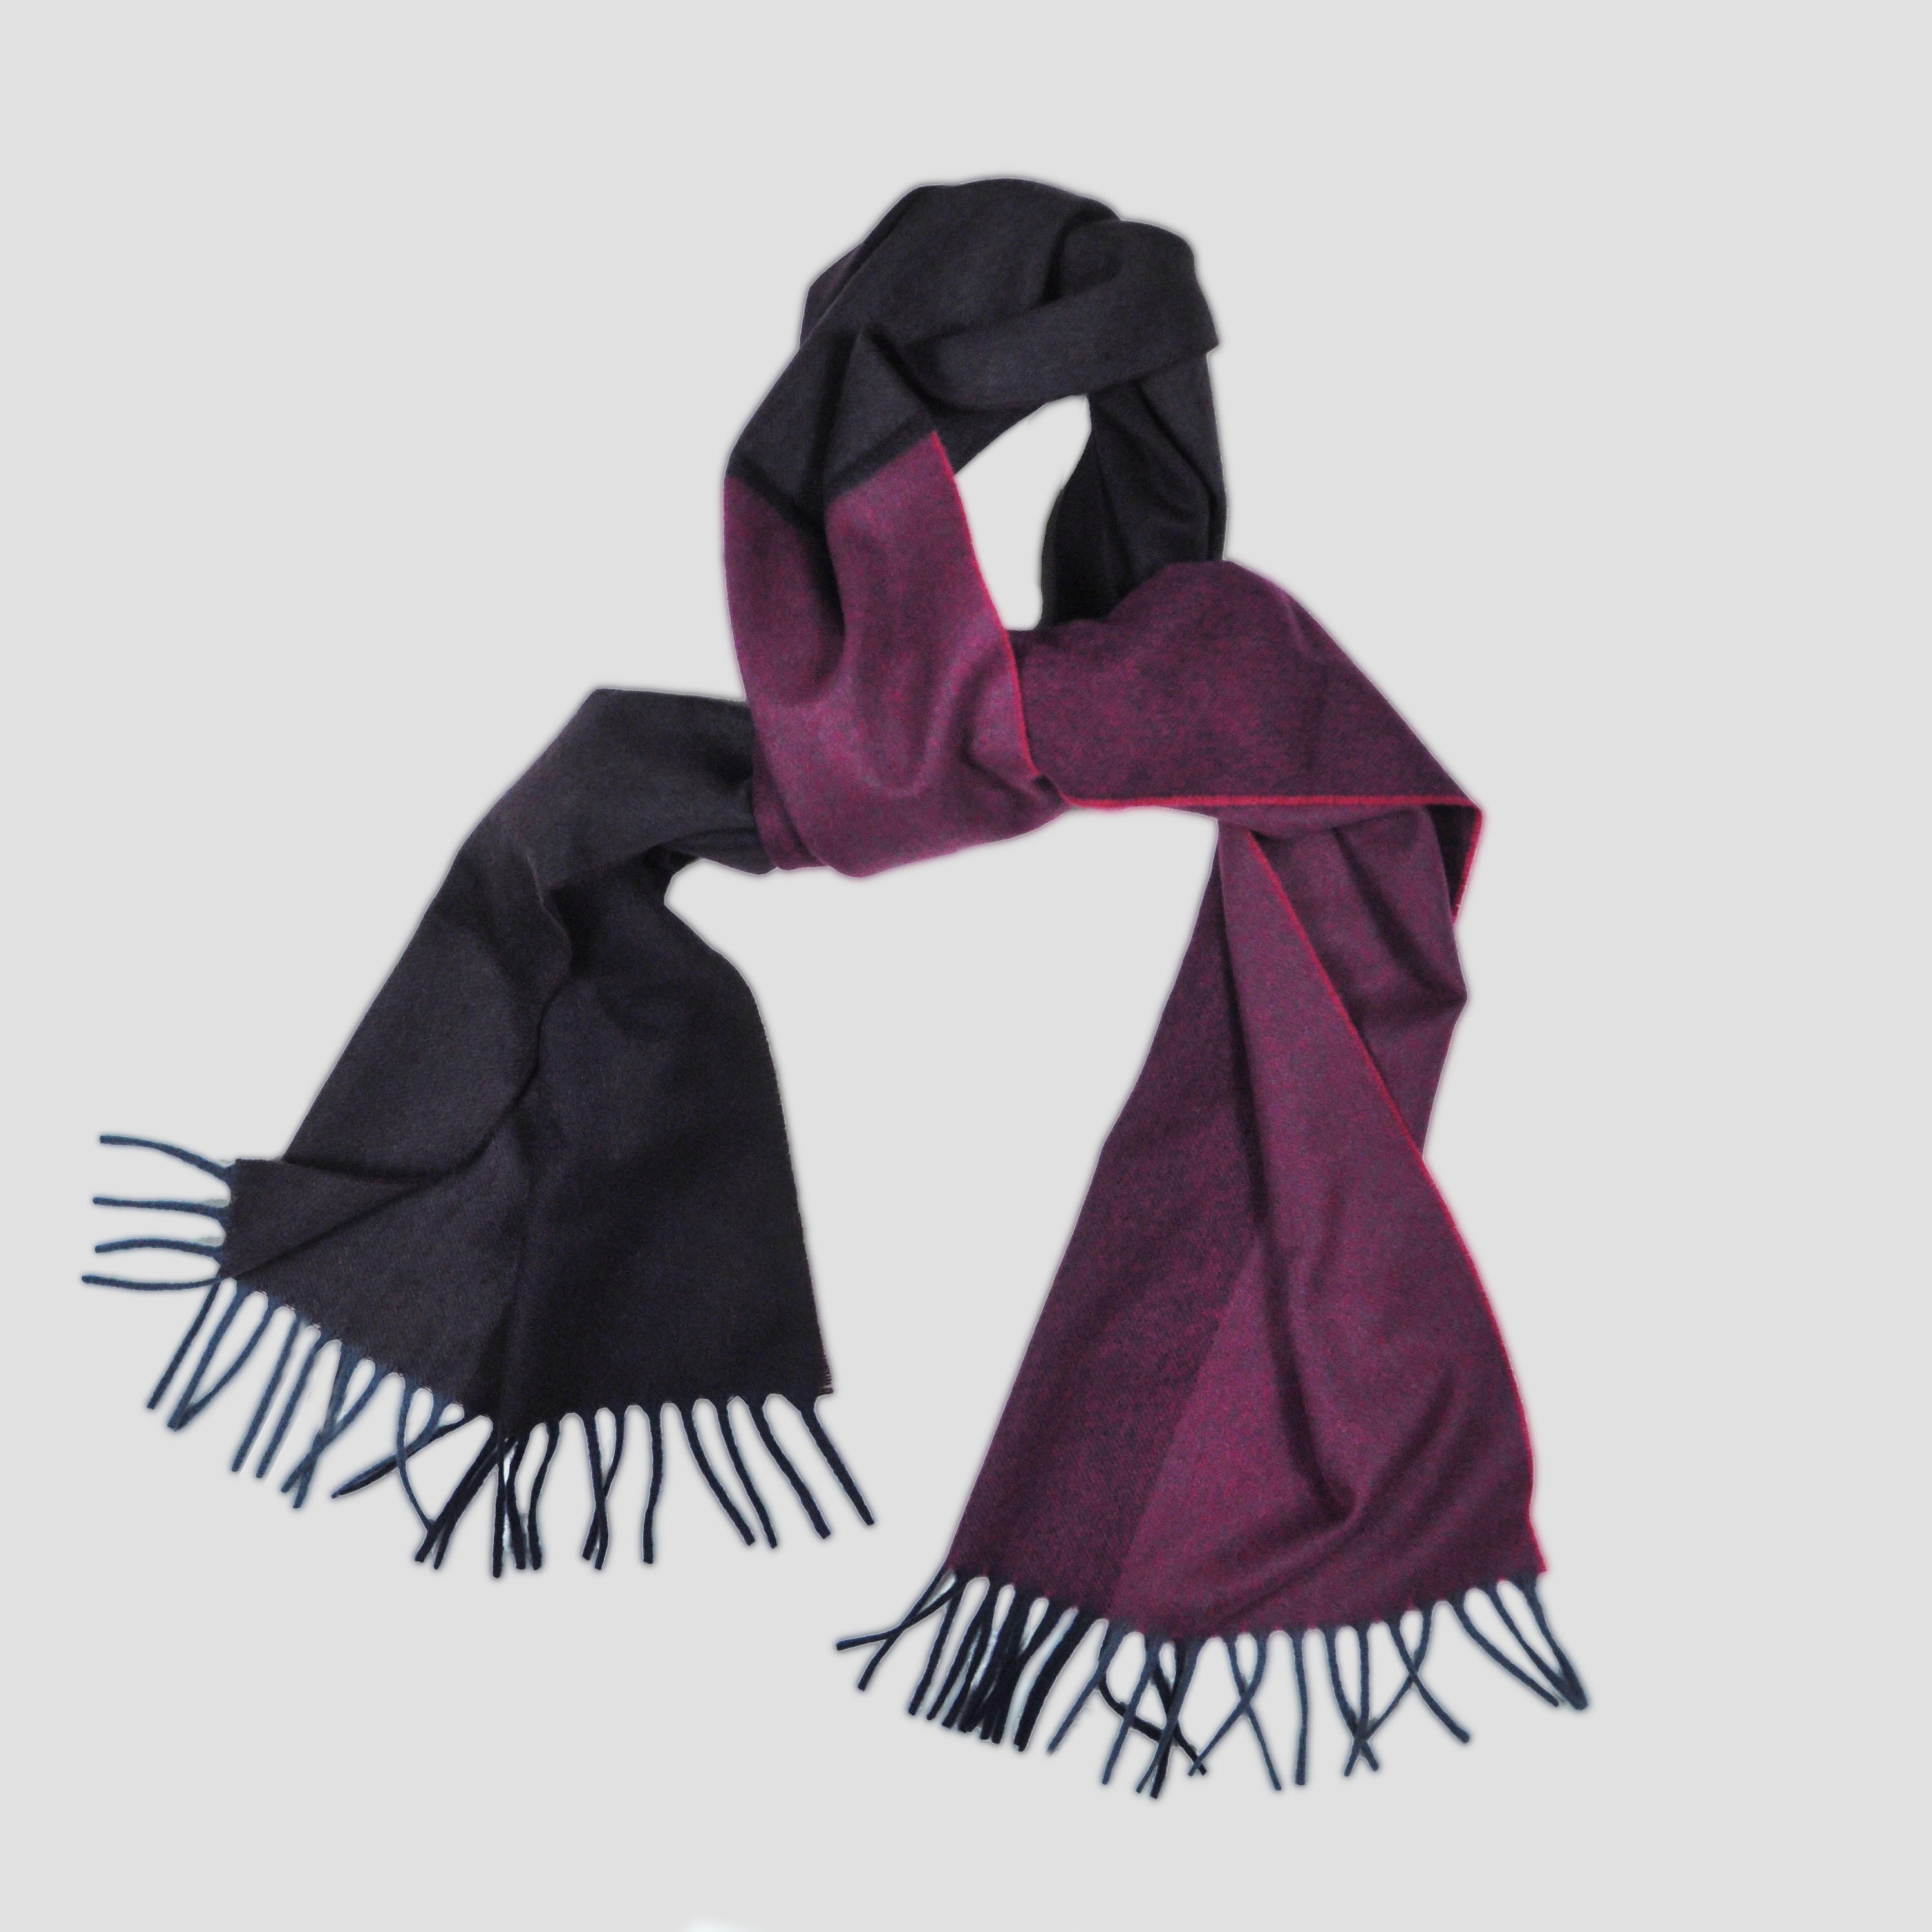 Four Panels of Colour Cashmere Scarf in Claret & Brown